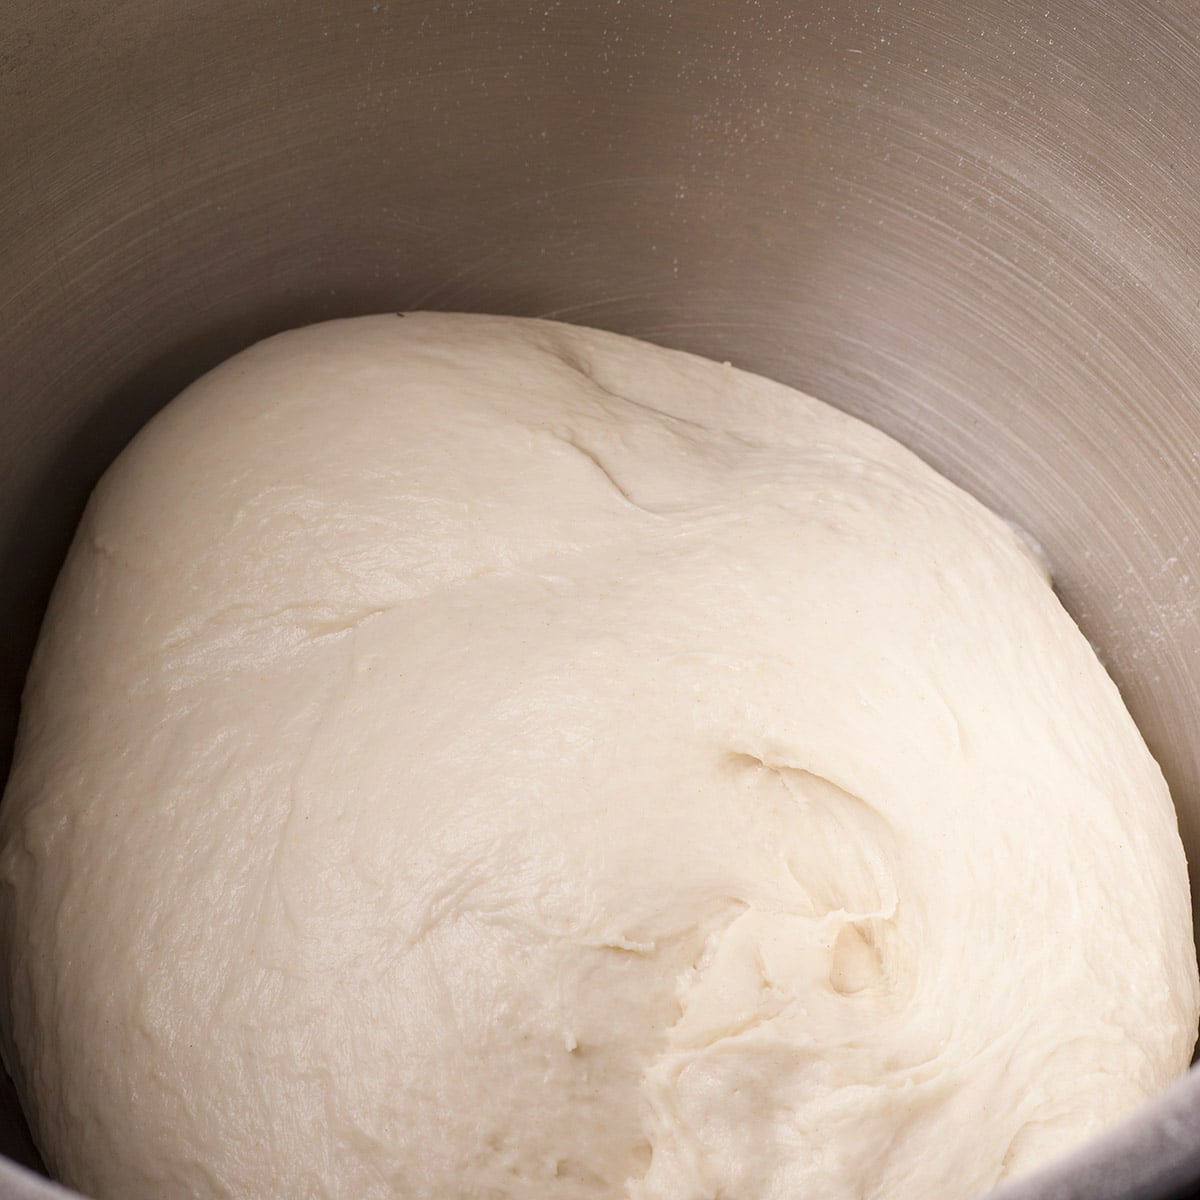 After allowing the dough to knead for 8 to 10 minutes, it should look smooth and soft, but not sticky.